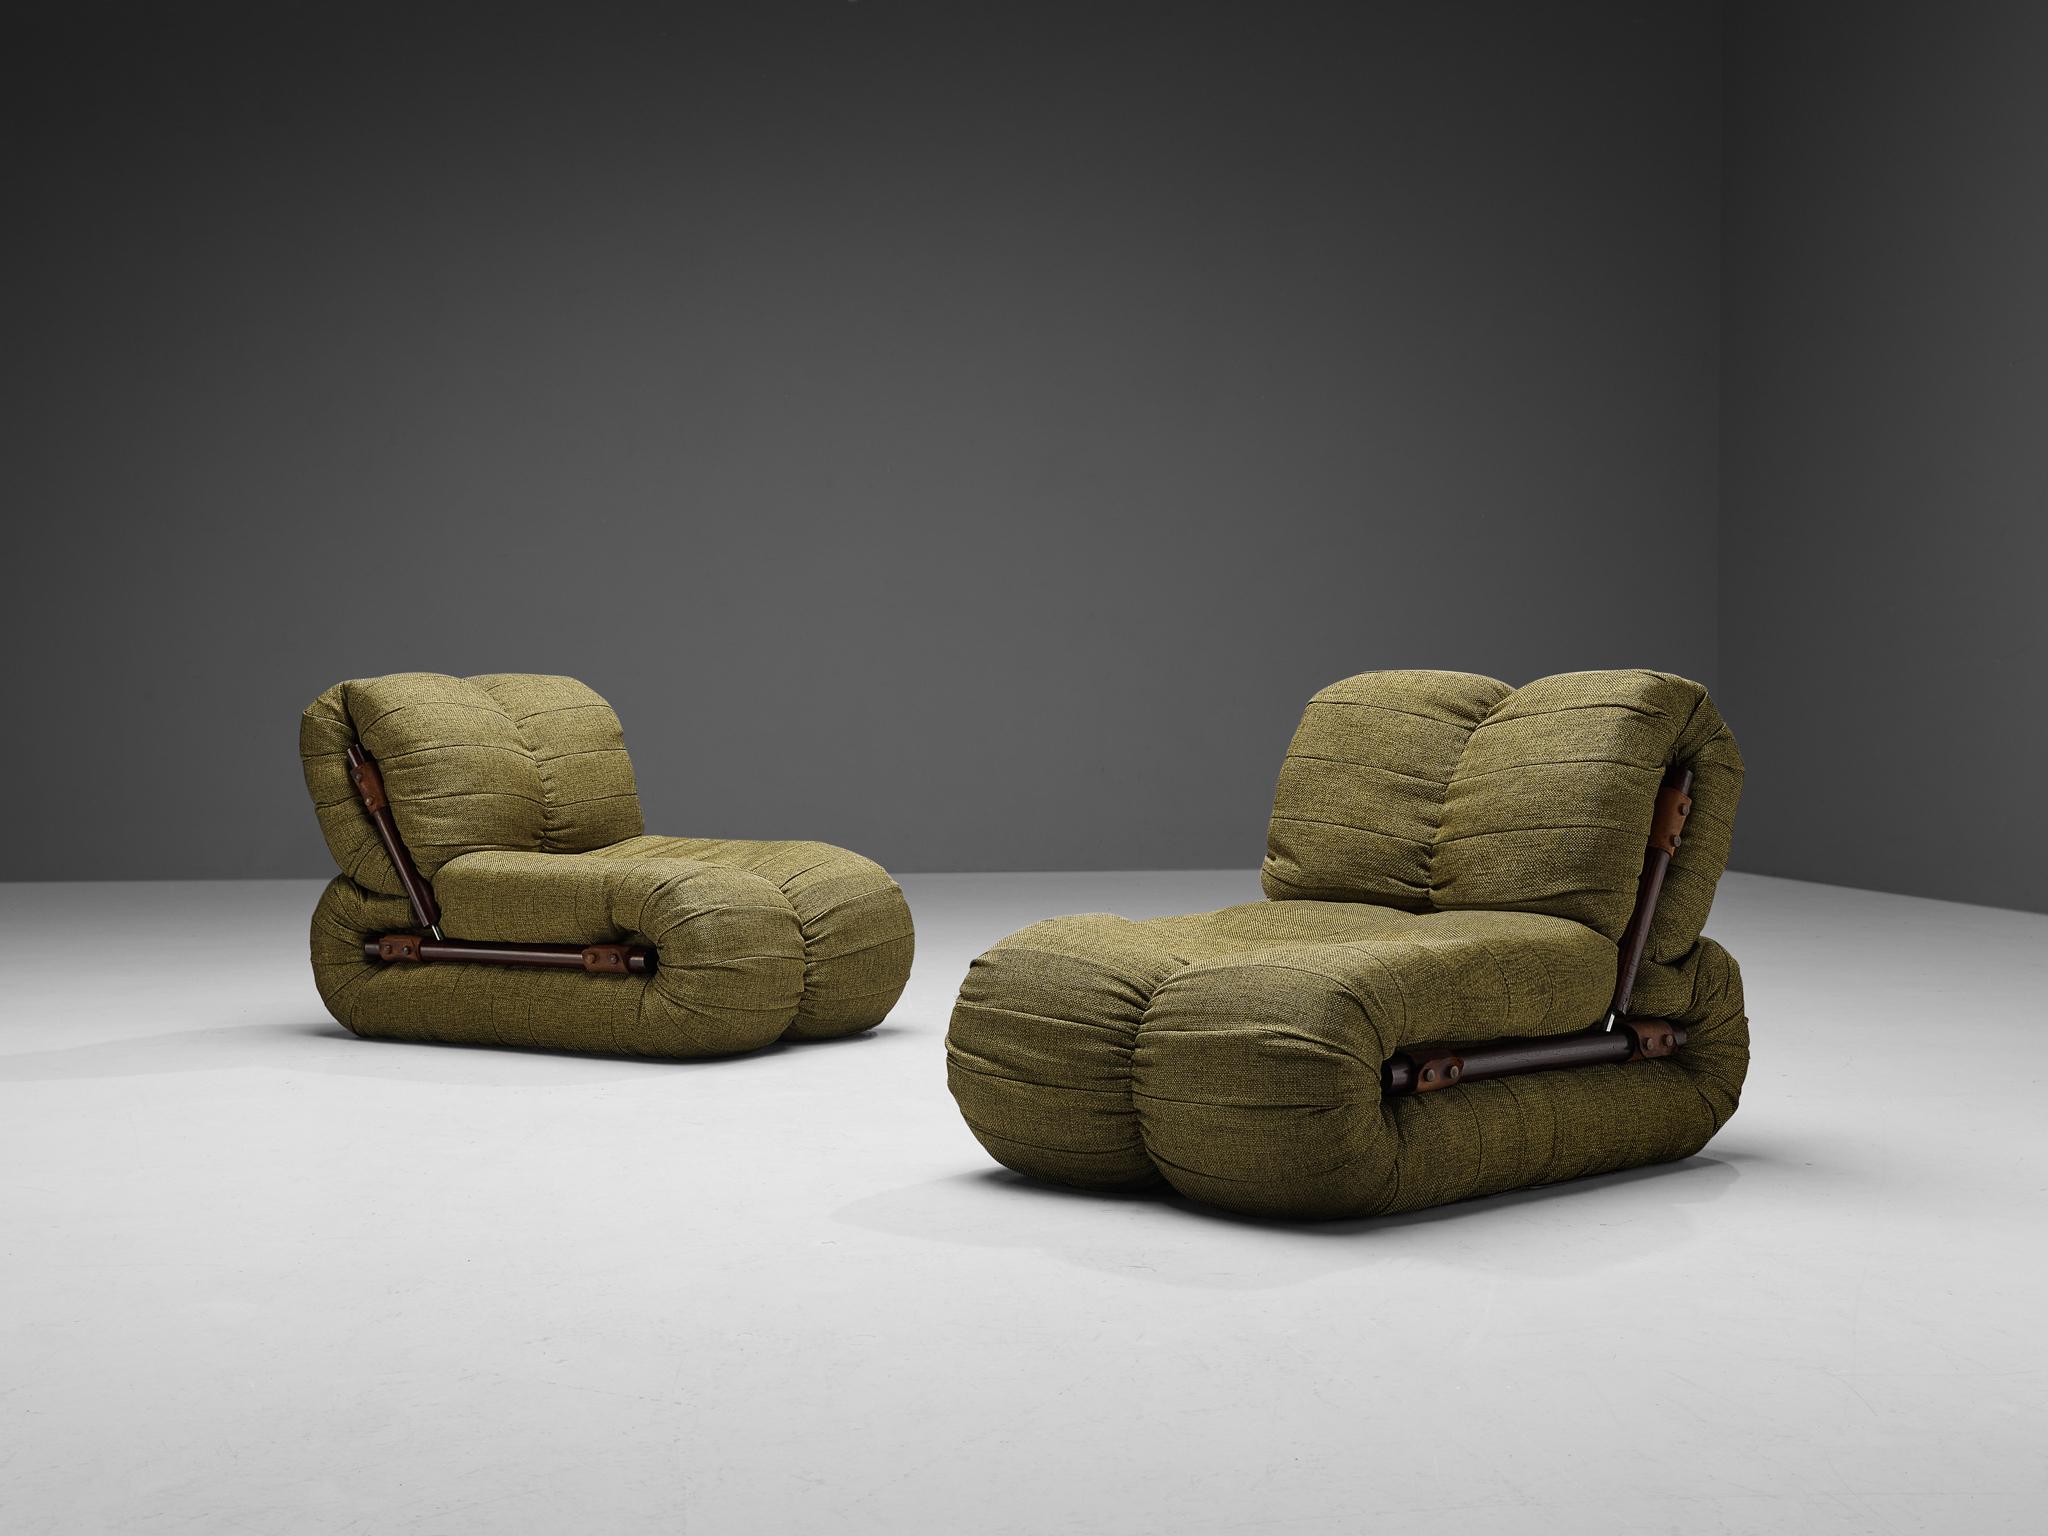 Percival Lafer Lounge Chairs in Khaki Green Upholstery 2